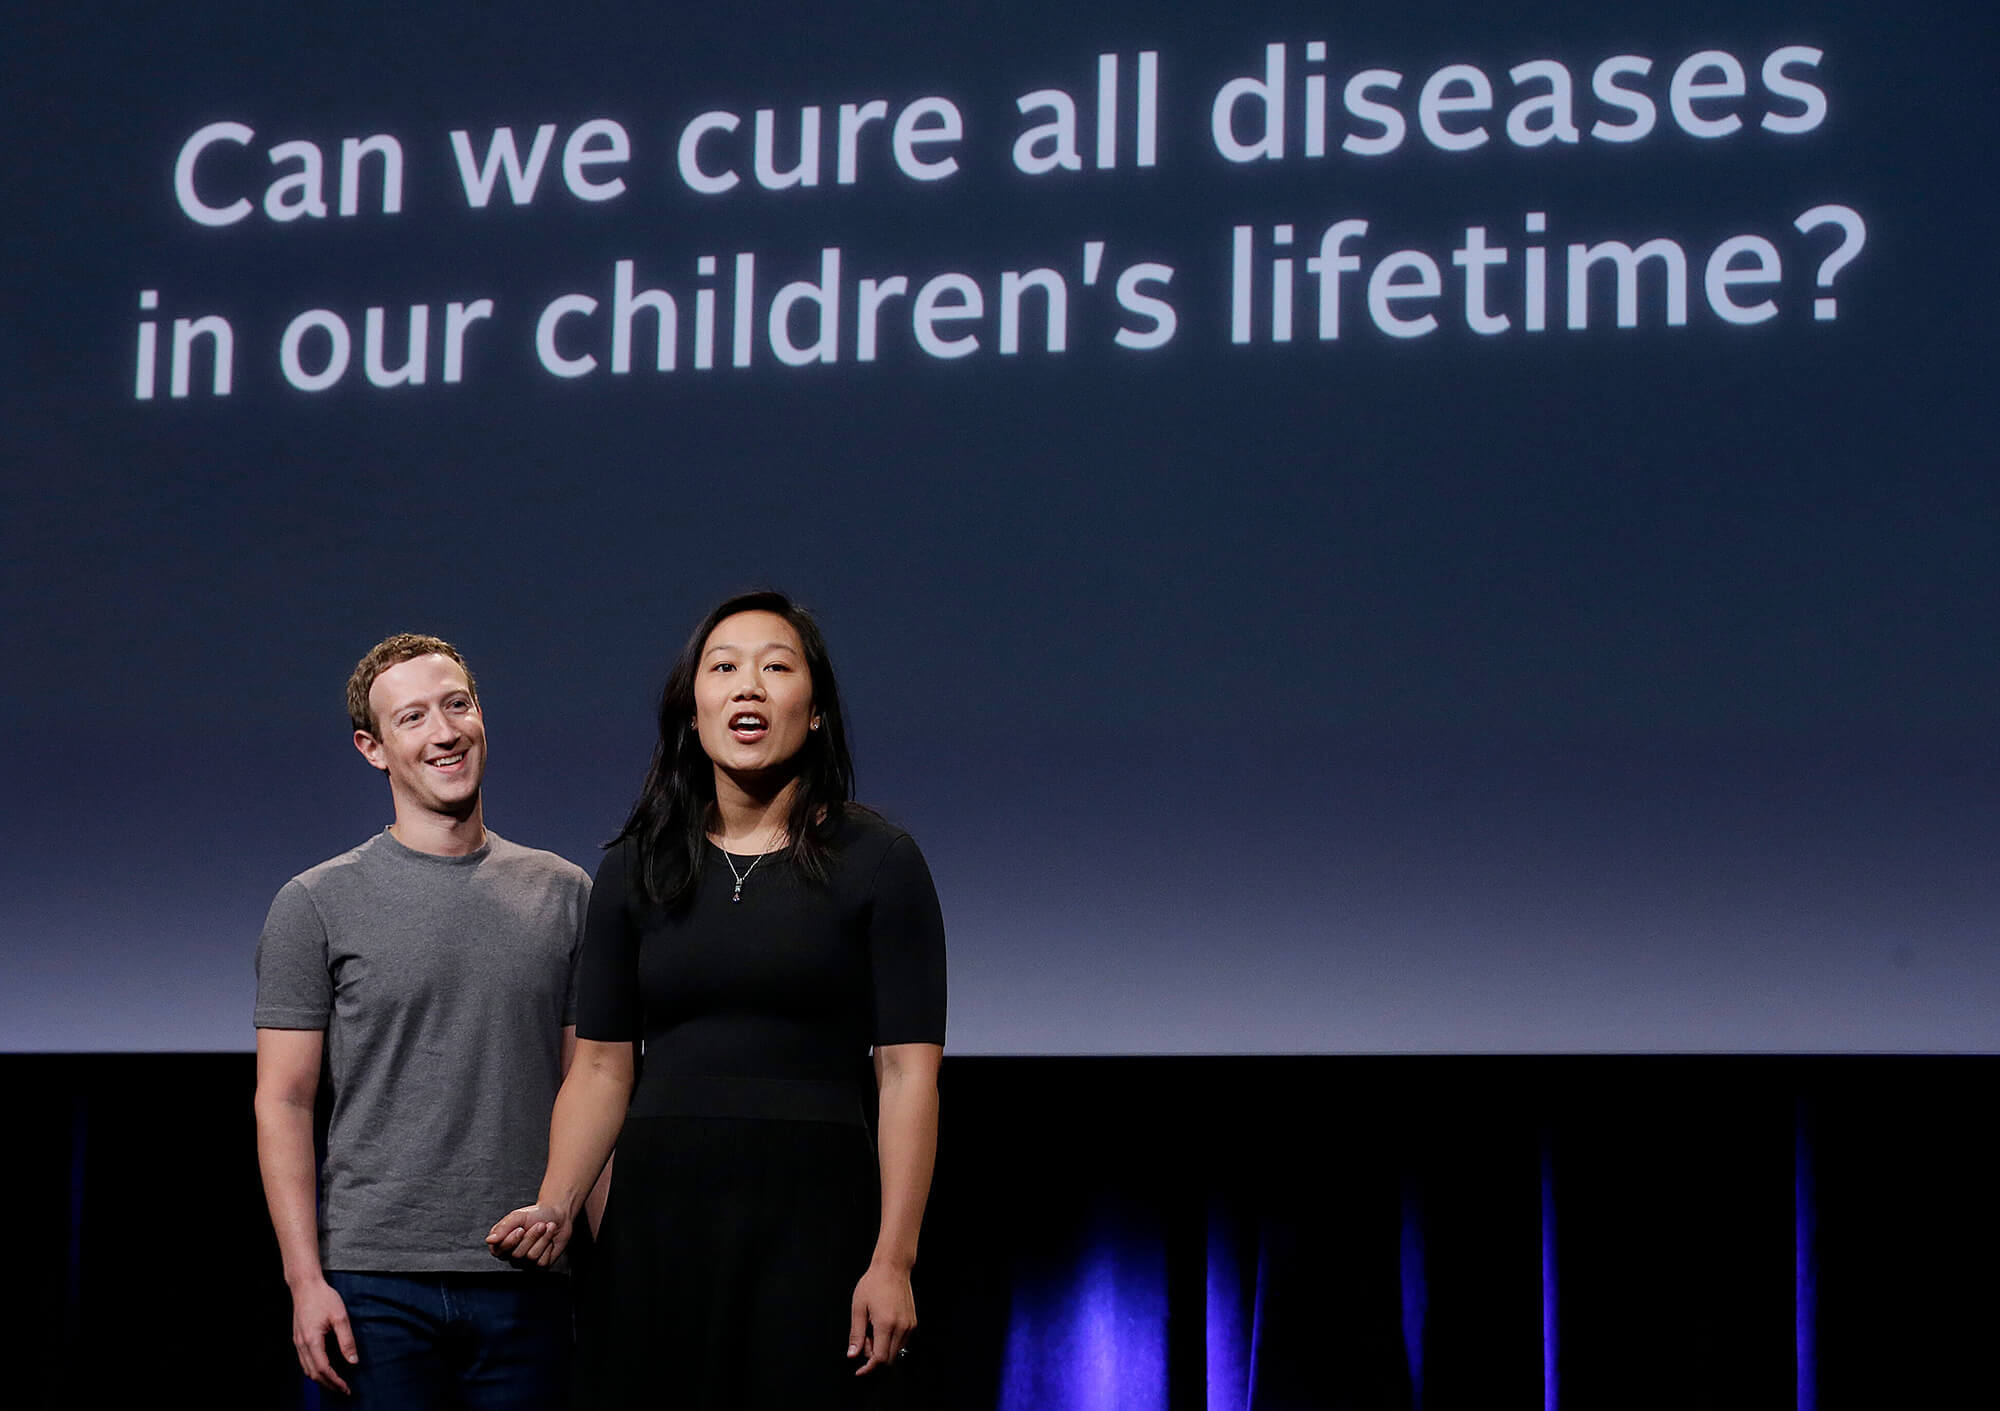 Image of Zuckerberg with his wife Priscilla Chan